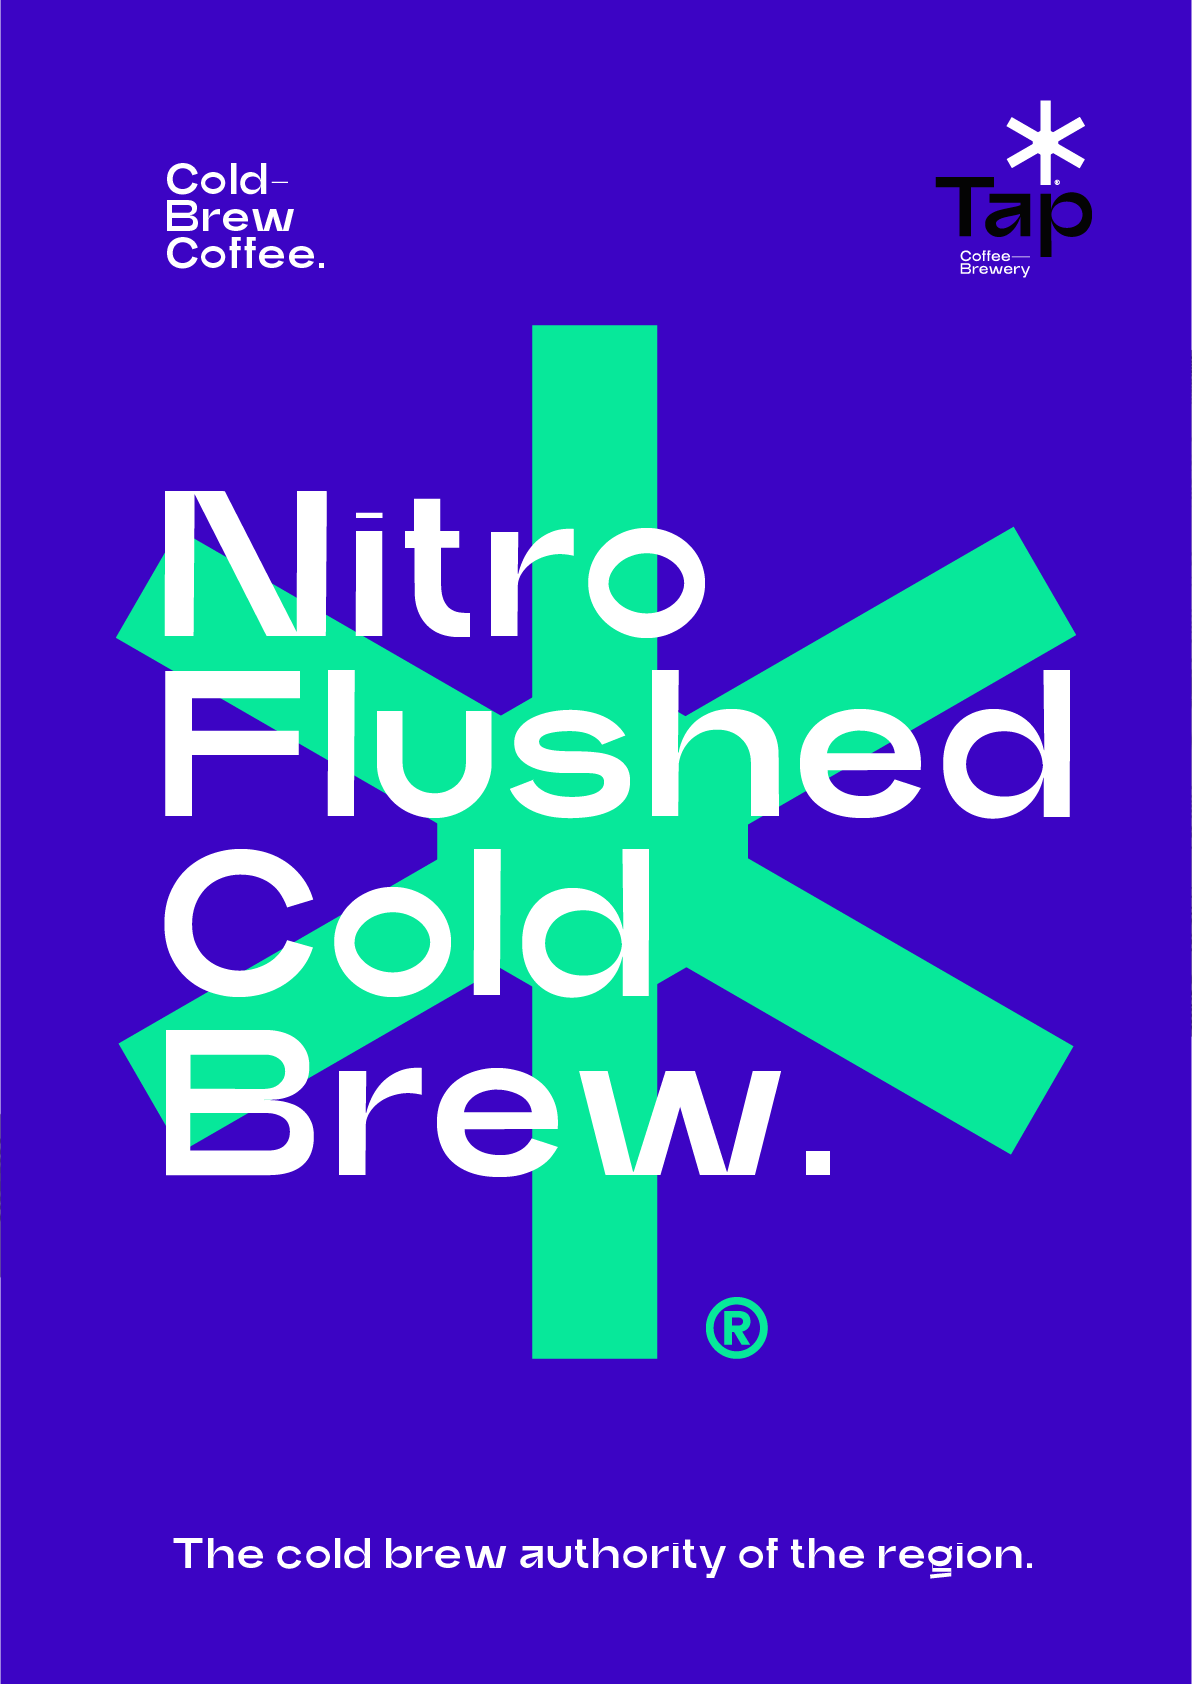 TAP Coffee Brewery on Behance077c4891907537.5e3d92d9af869.png